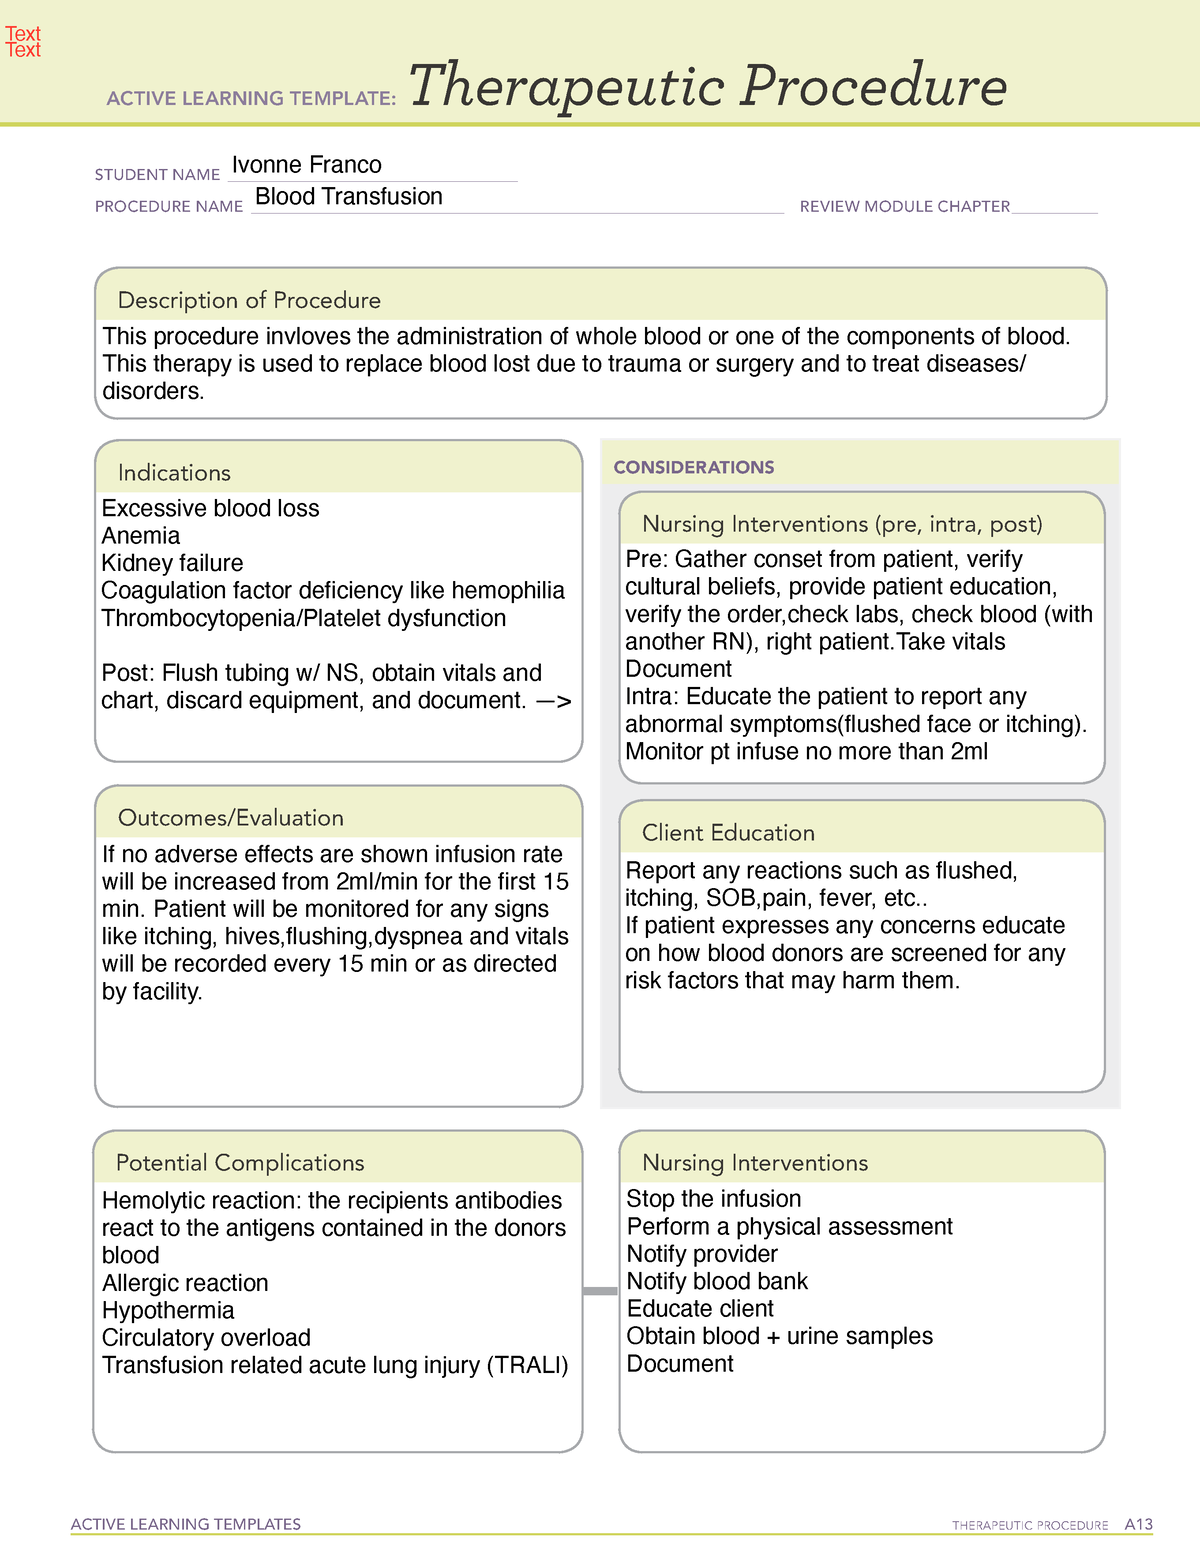 Blood transfusion template ACTIVE LEARNING TEMPLATES THERAPEUTIC